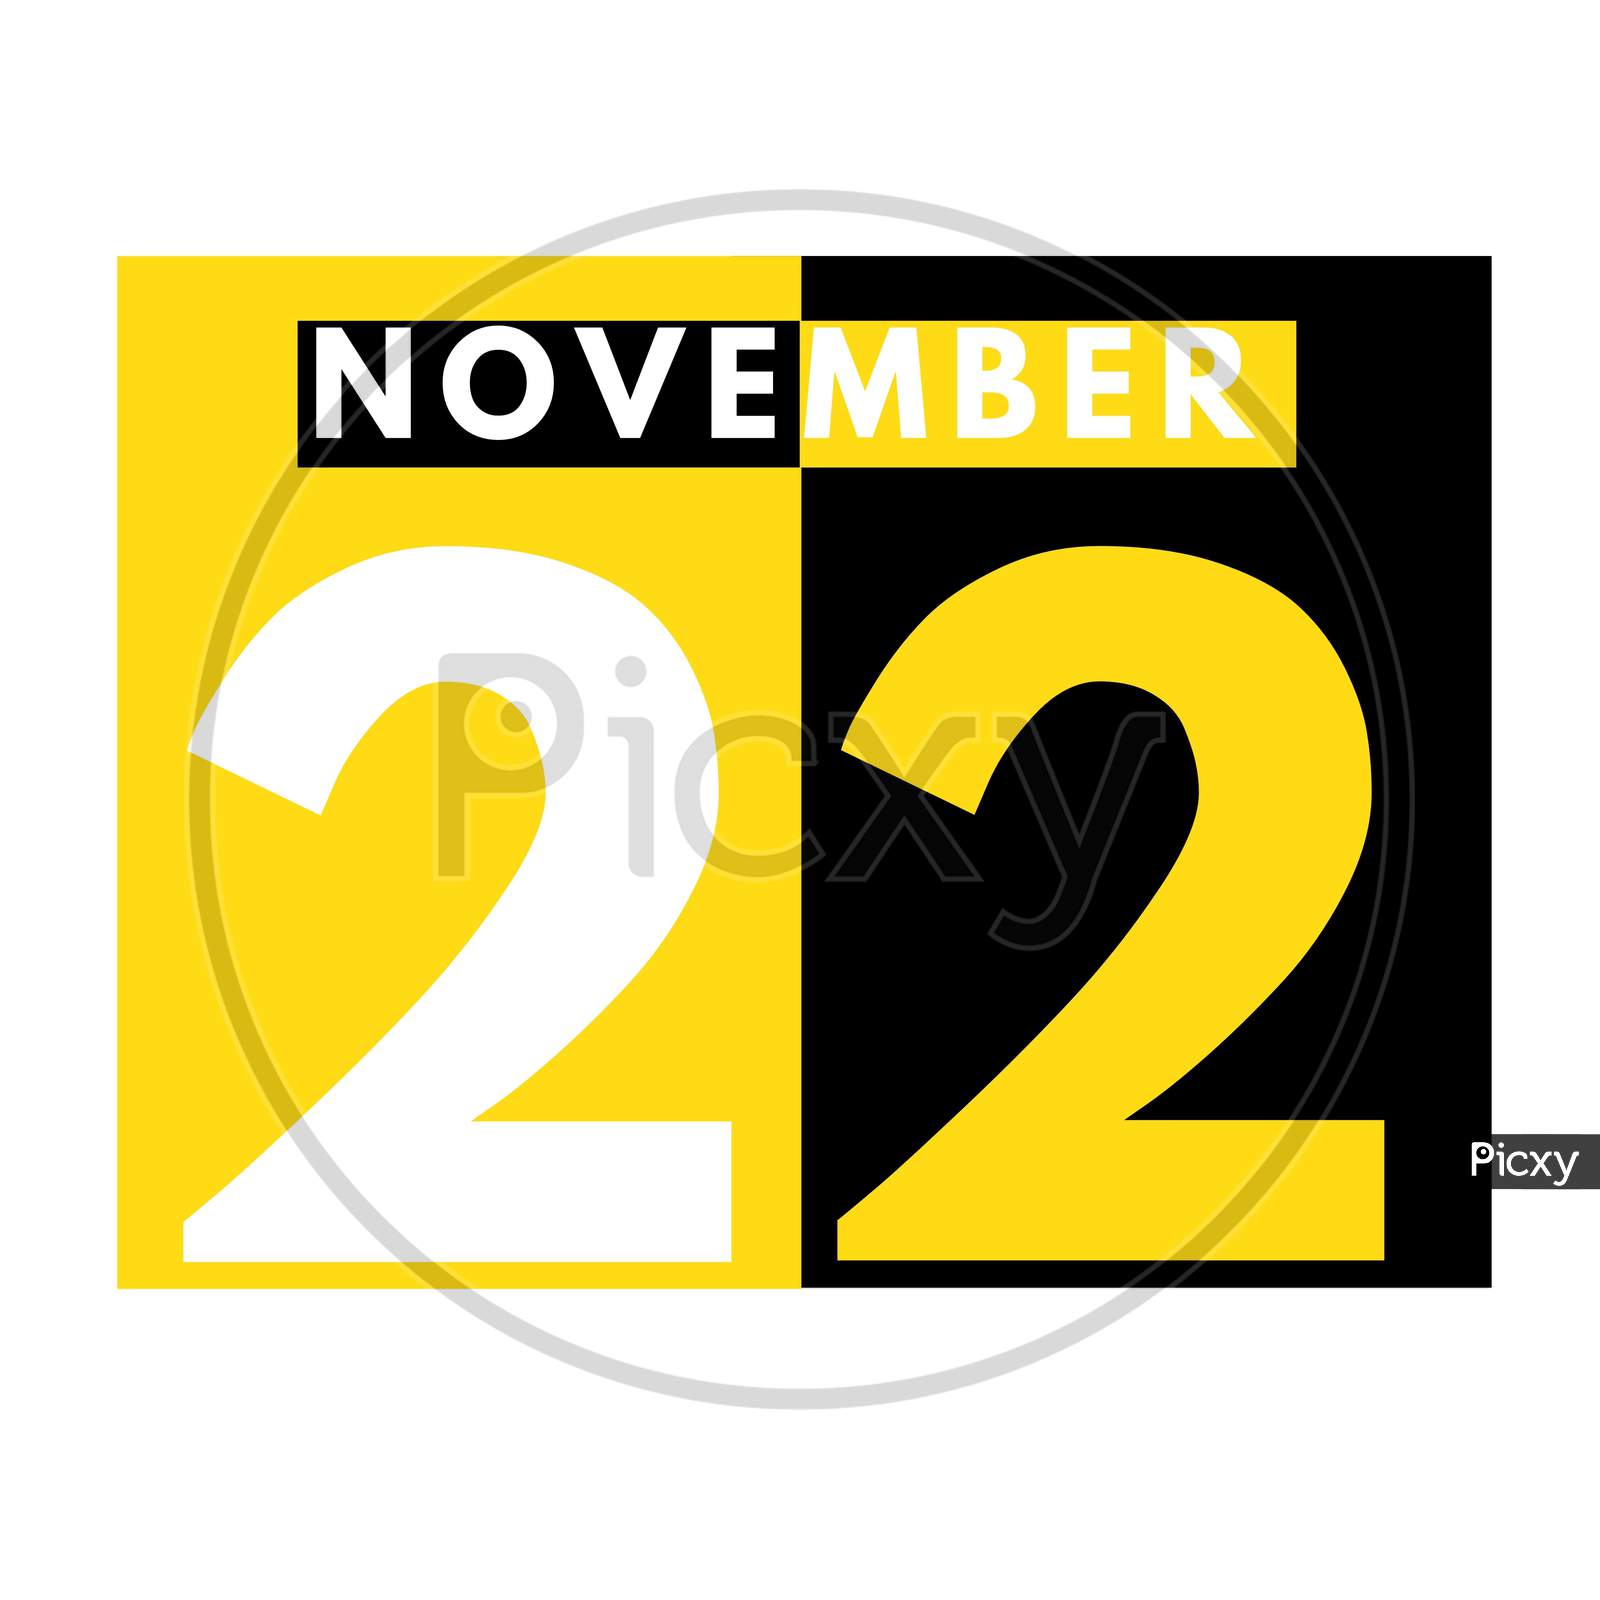 November 22 . Modern Daily Calendar Icon .Date ,Day, Month .Calendar For The Month Of November